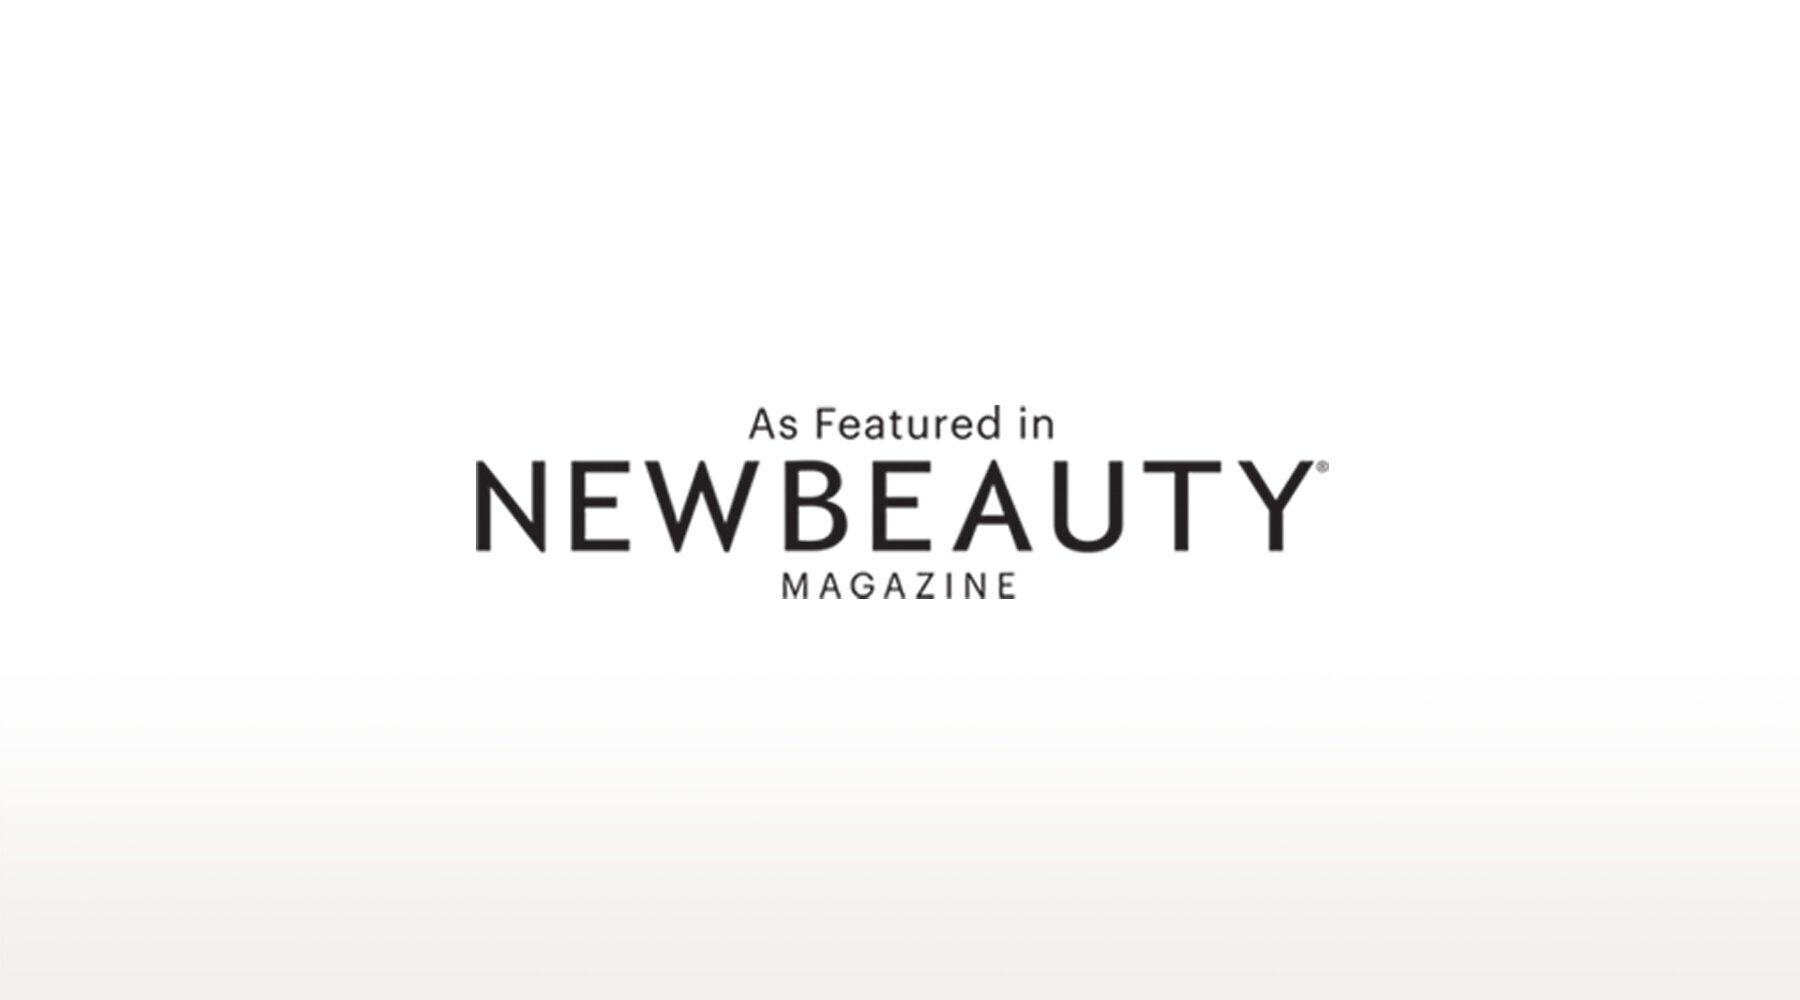 Dr. Boudreault is featured in New Beauty magazine!